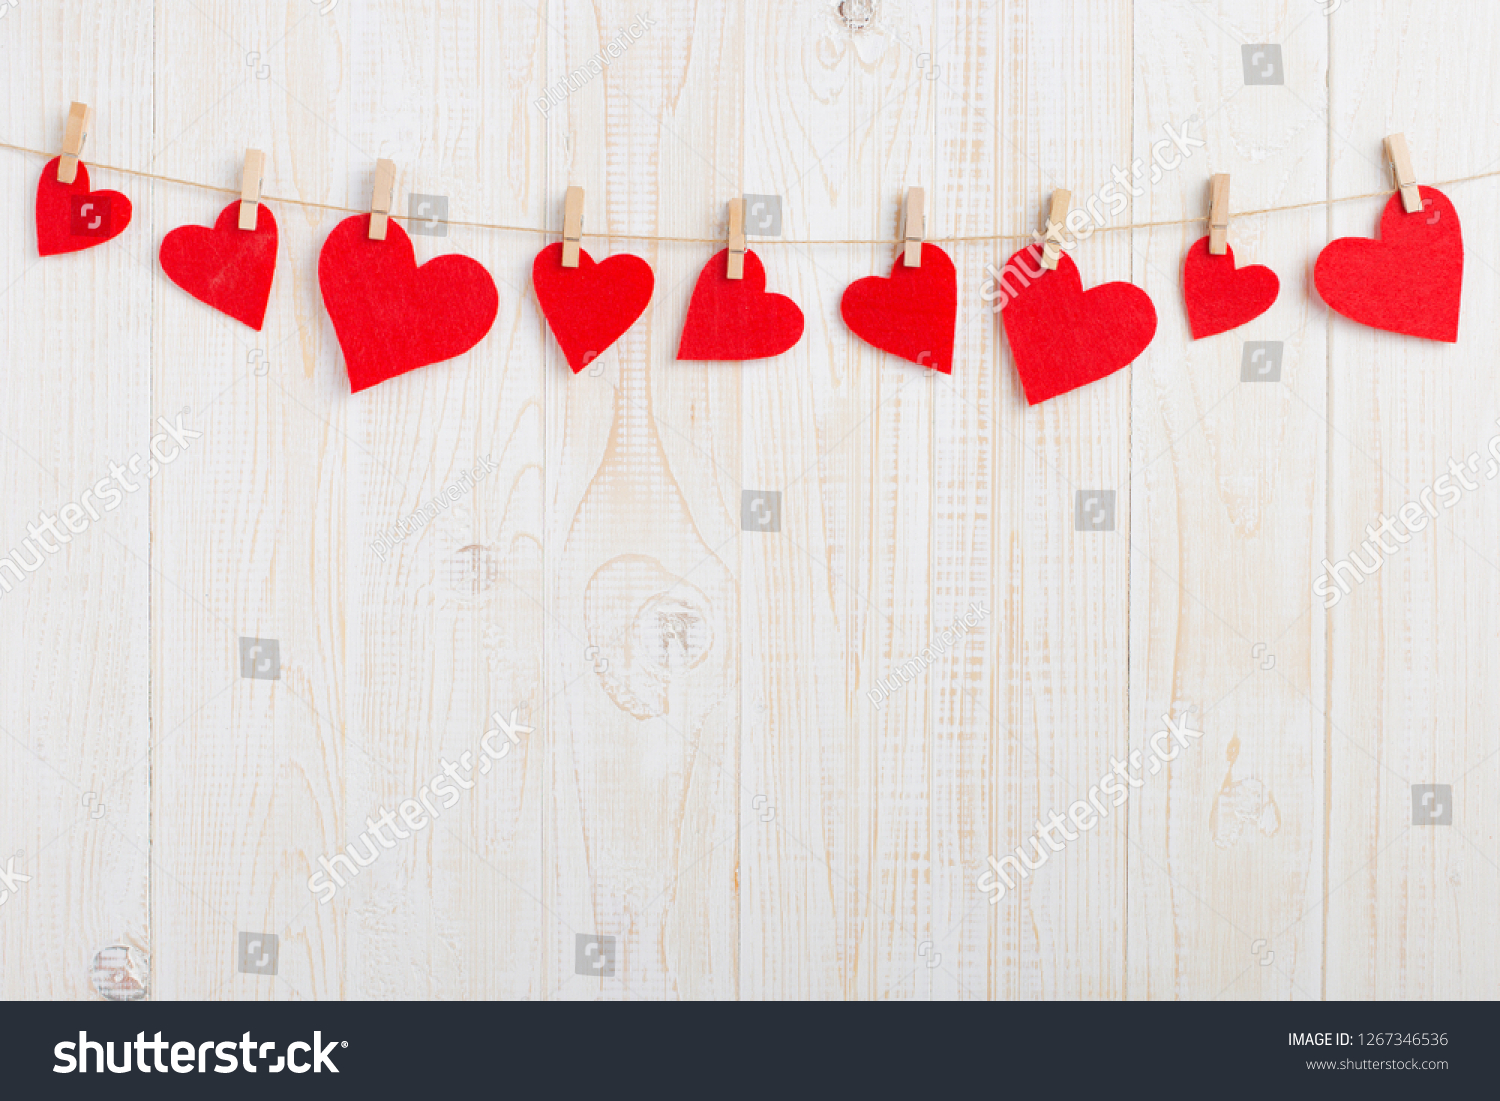 Red hearts on rope with clothespins, on a white wooden background. Place for text, copy space. #1267346536